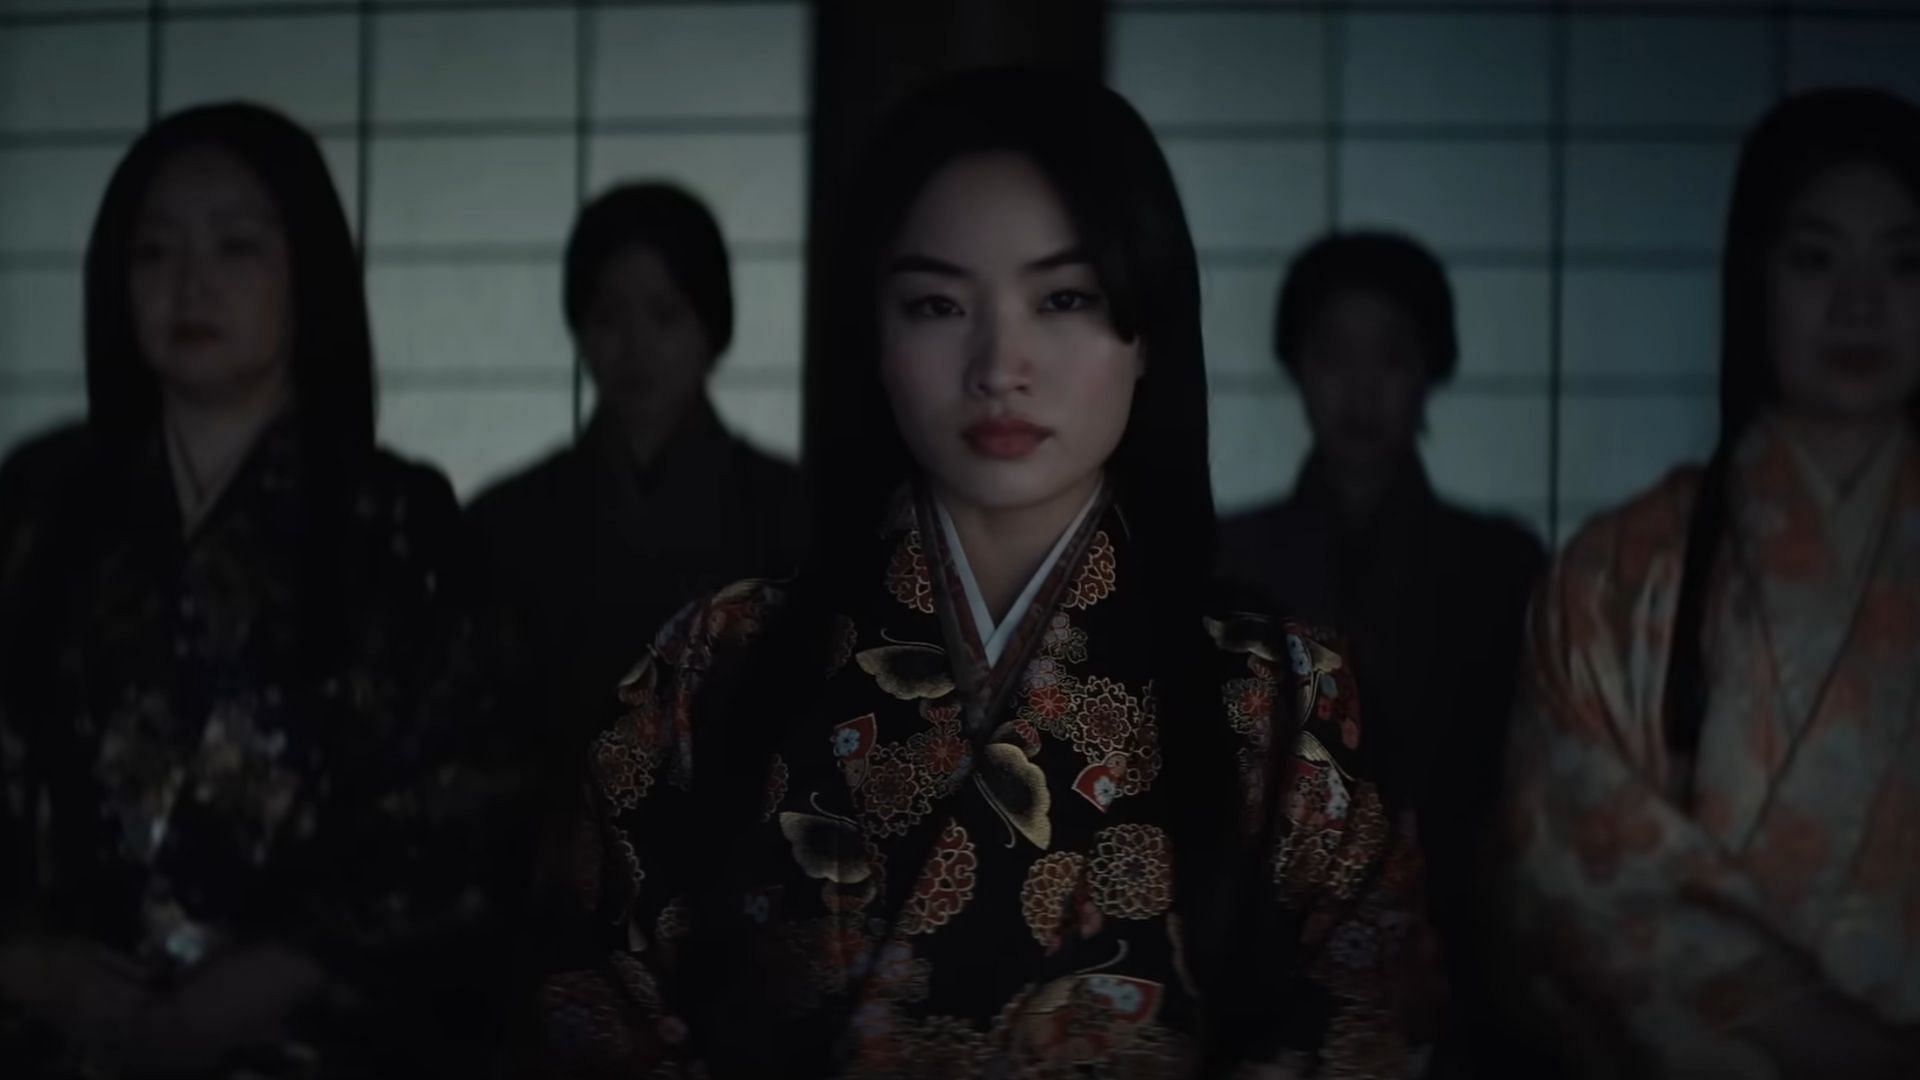 Shōgun: Release date, cast, plot, and everything we know so far (Image via FX Networks)